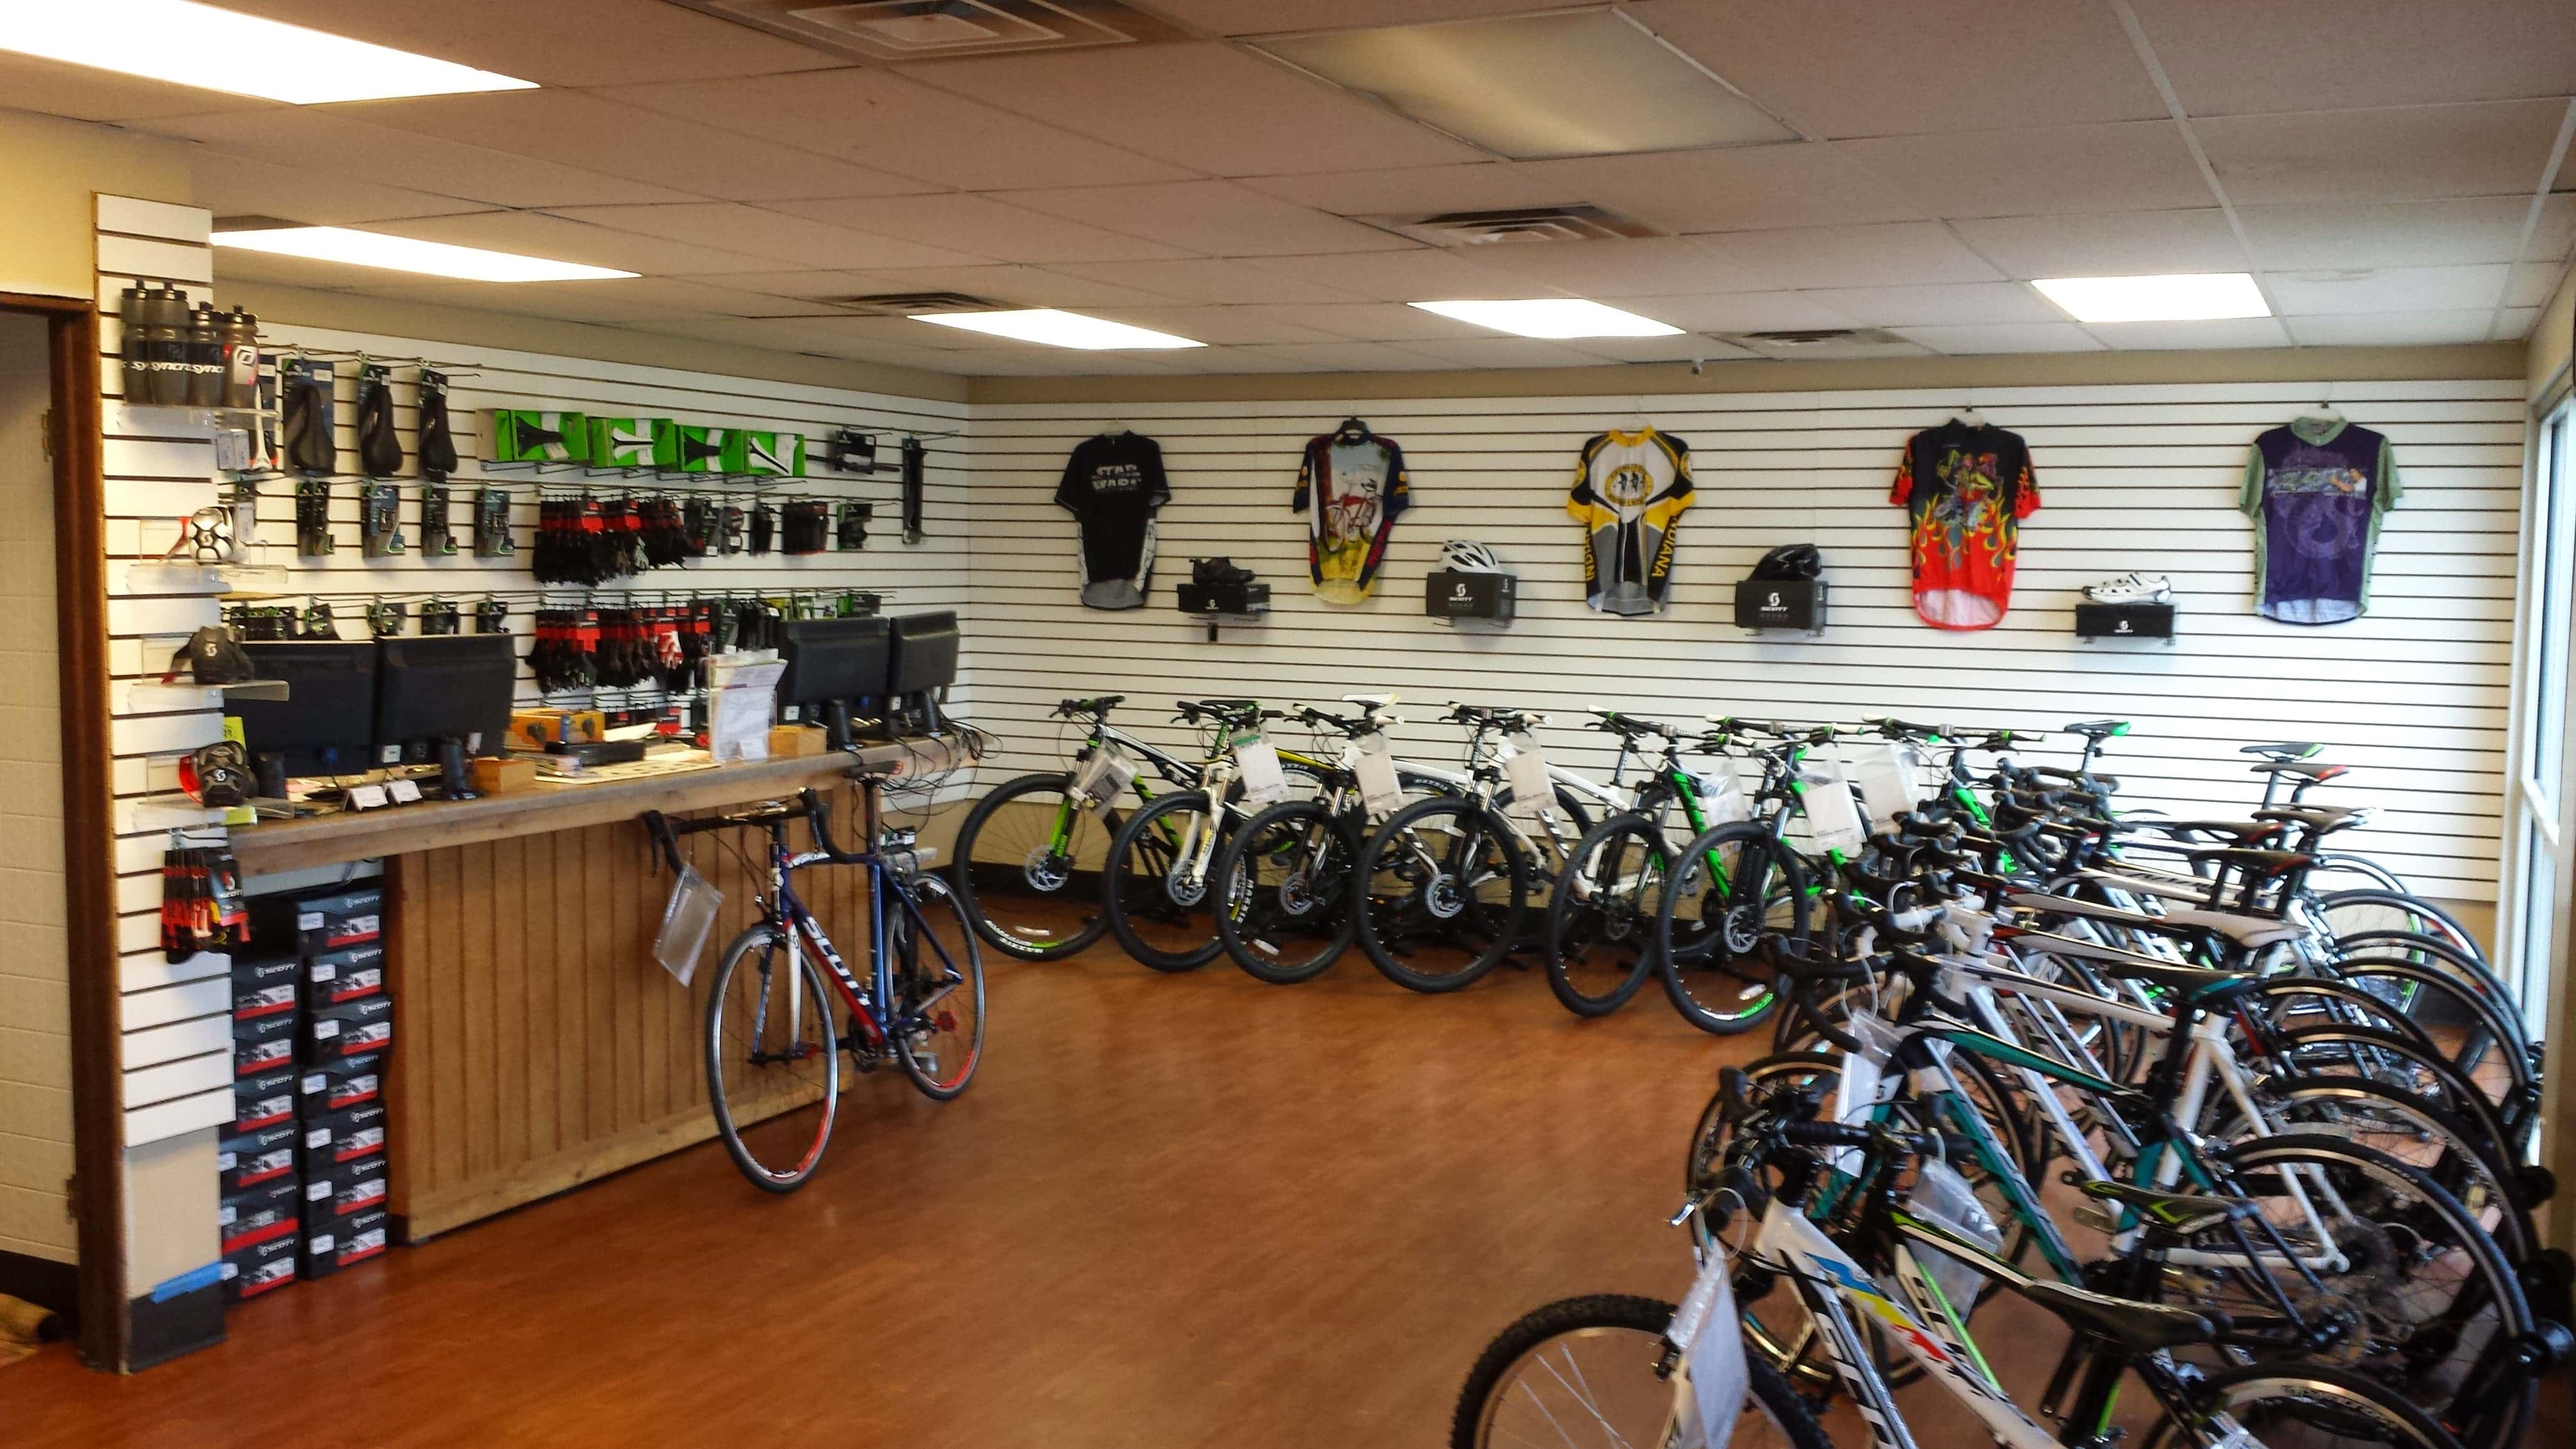 A1 Cycle Center - Merrillville, IN, US, bicycle shop